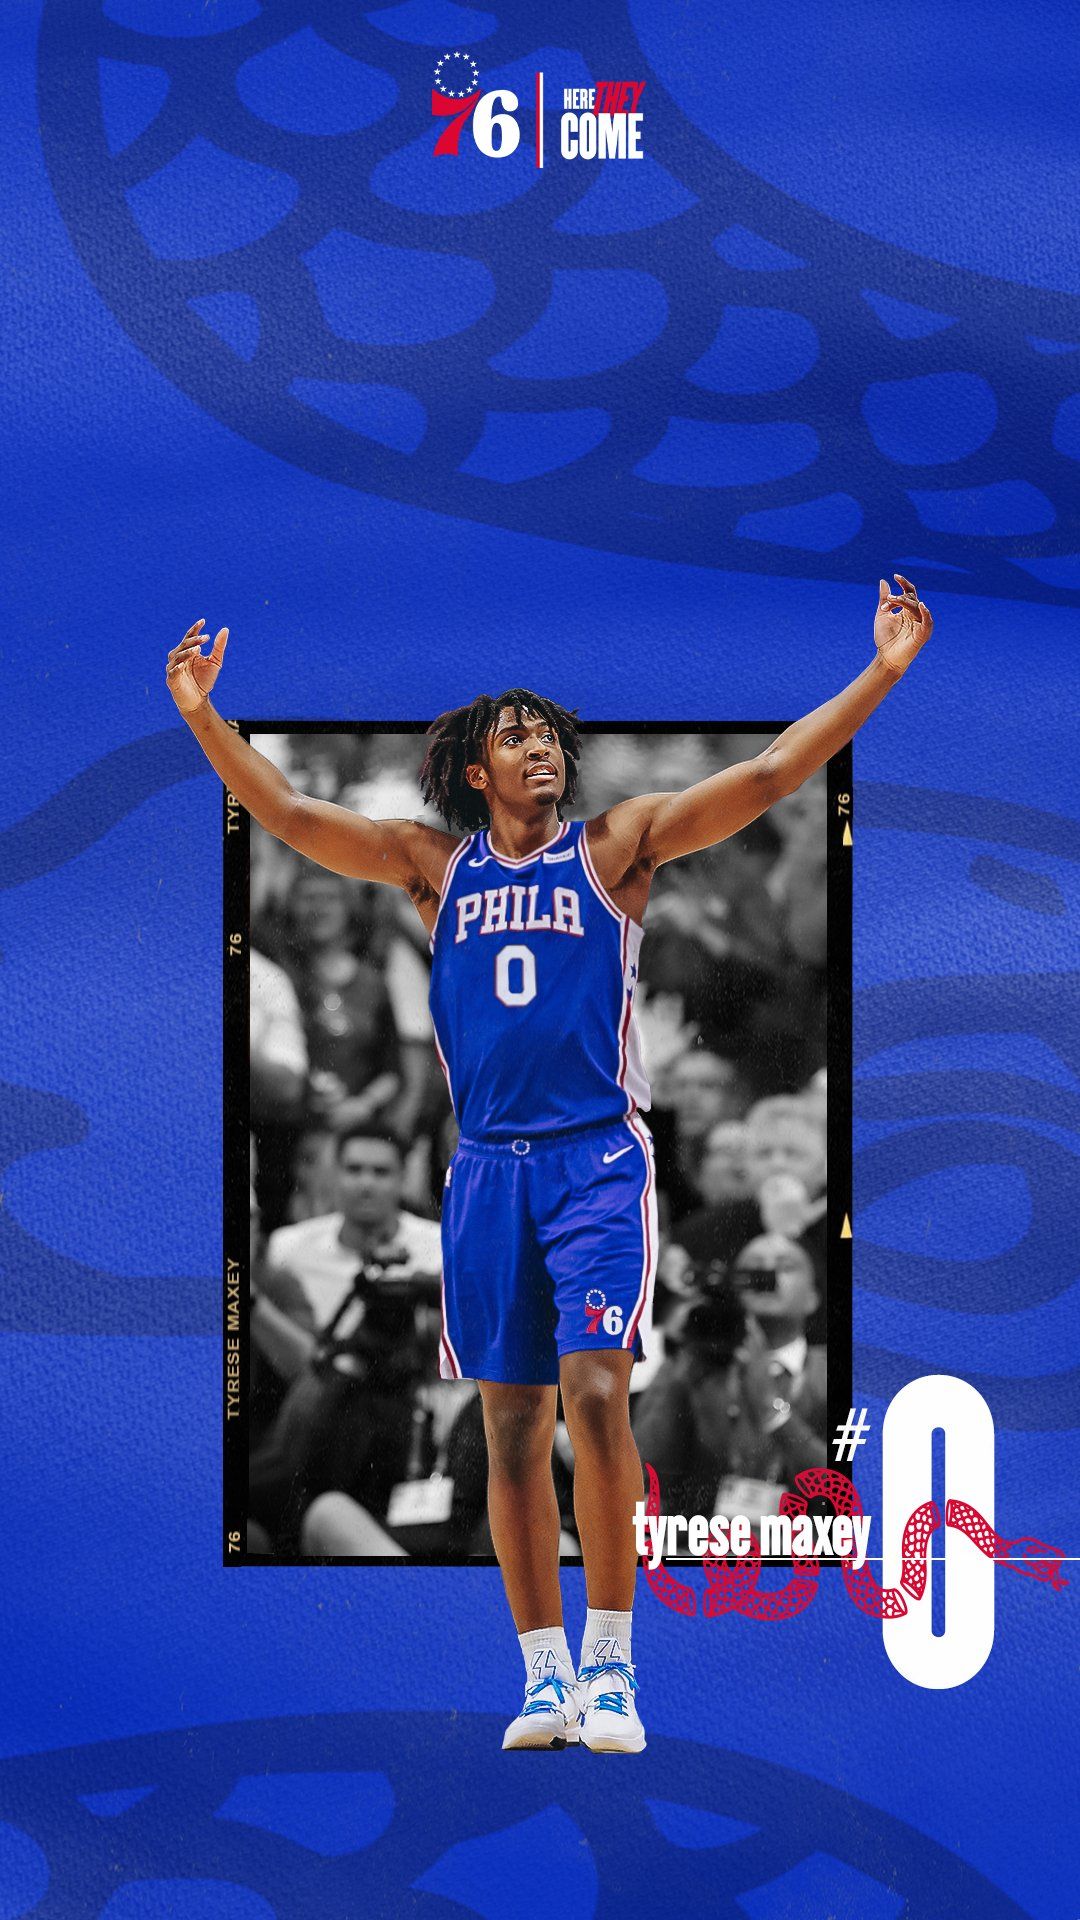 Philadelphia 76ers: Tyrese Maxey is justifiably named a Rising Star